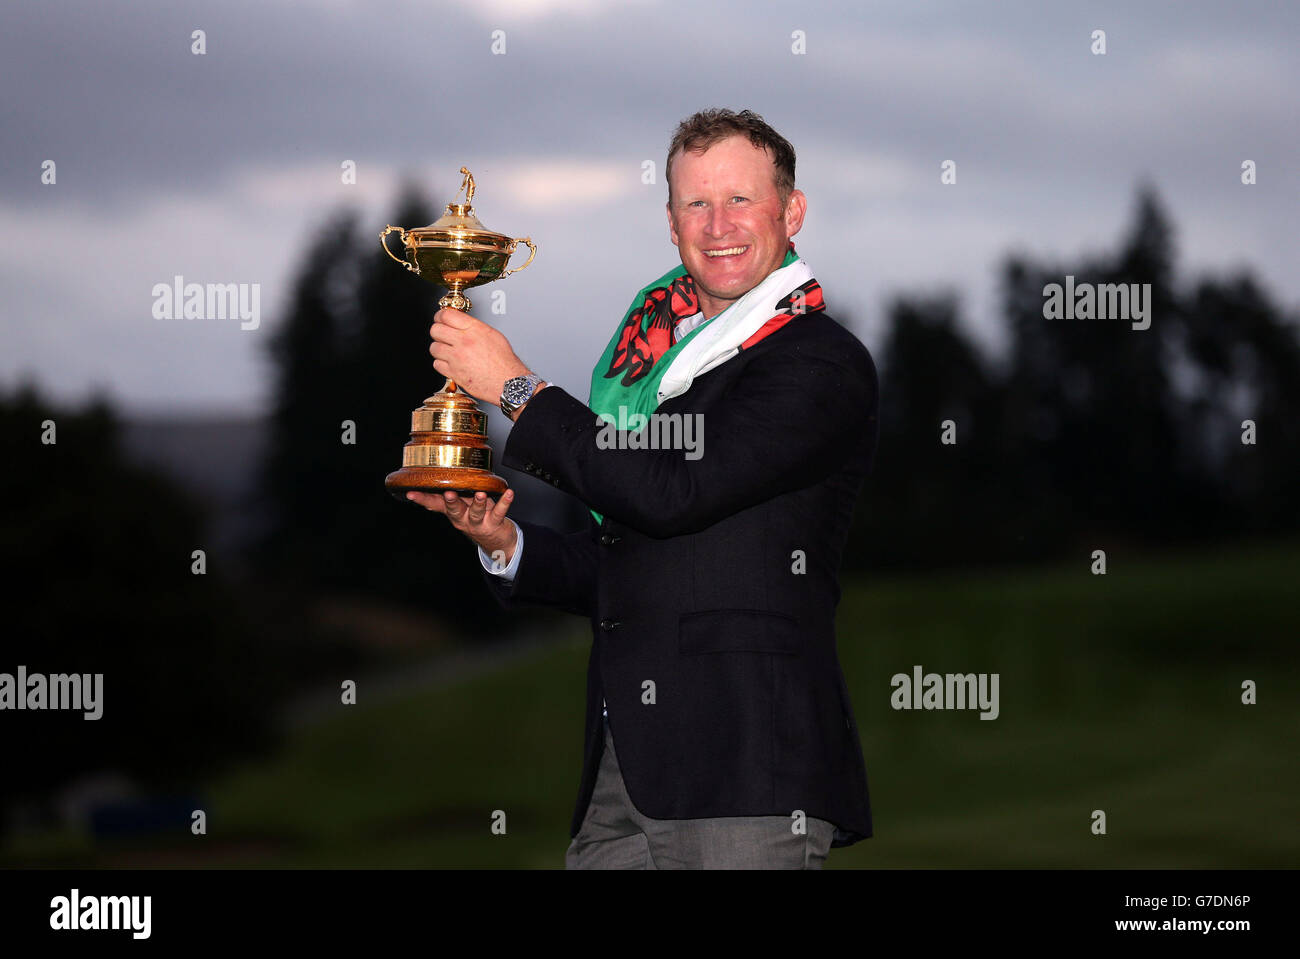 Europe's Jamie Donaldson with the Ryder Cup trophy on day three of the 40th Ryder Cup at Gleneagles Golf Course, Perthshire. Stock Photo